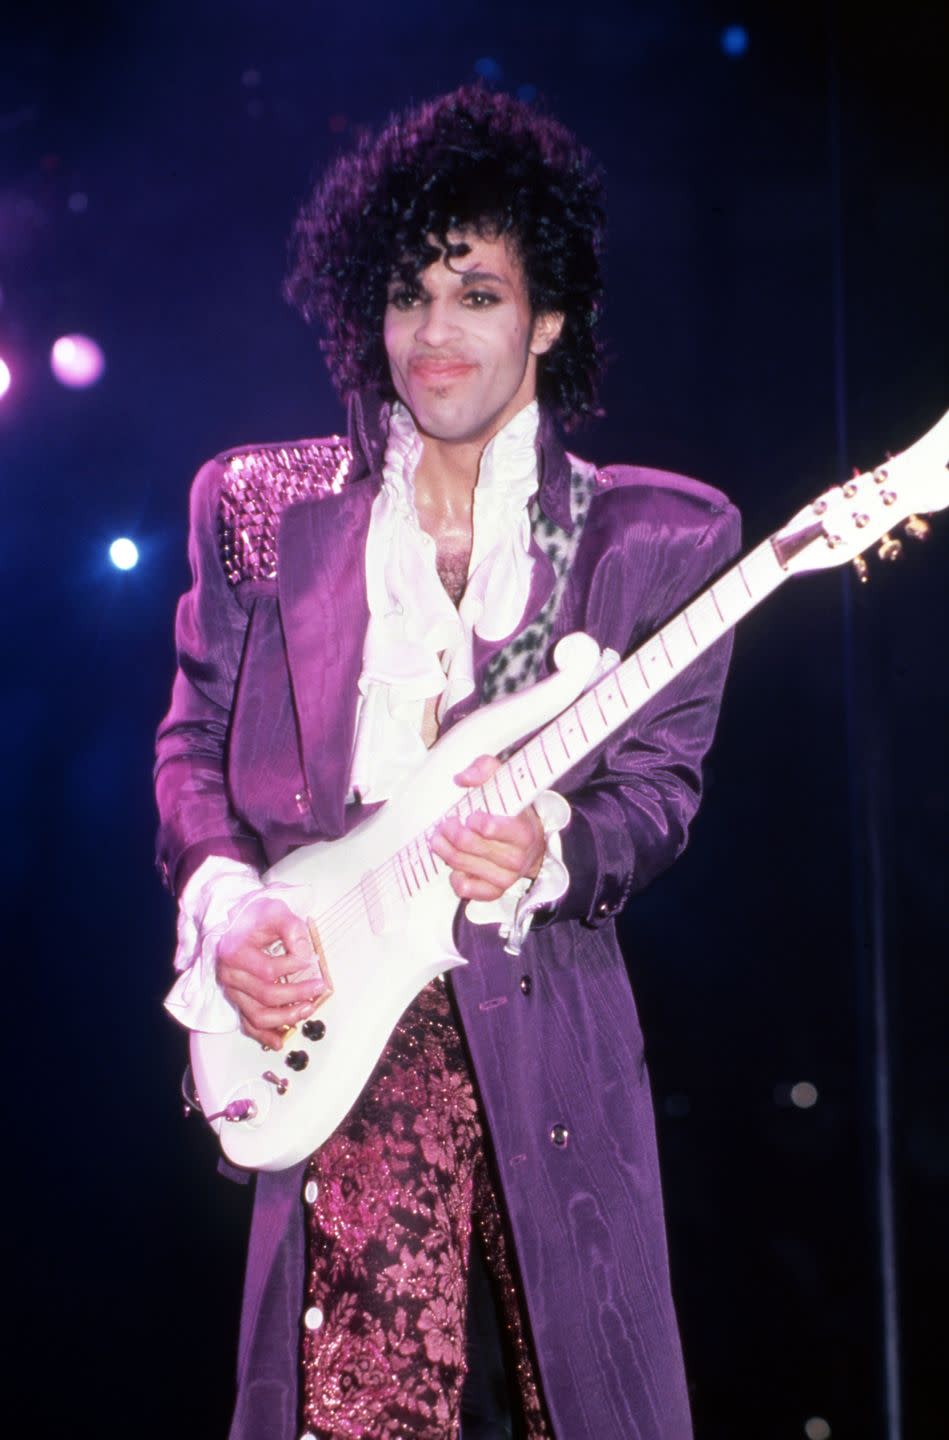 'When Doves Cry' by Prince